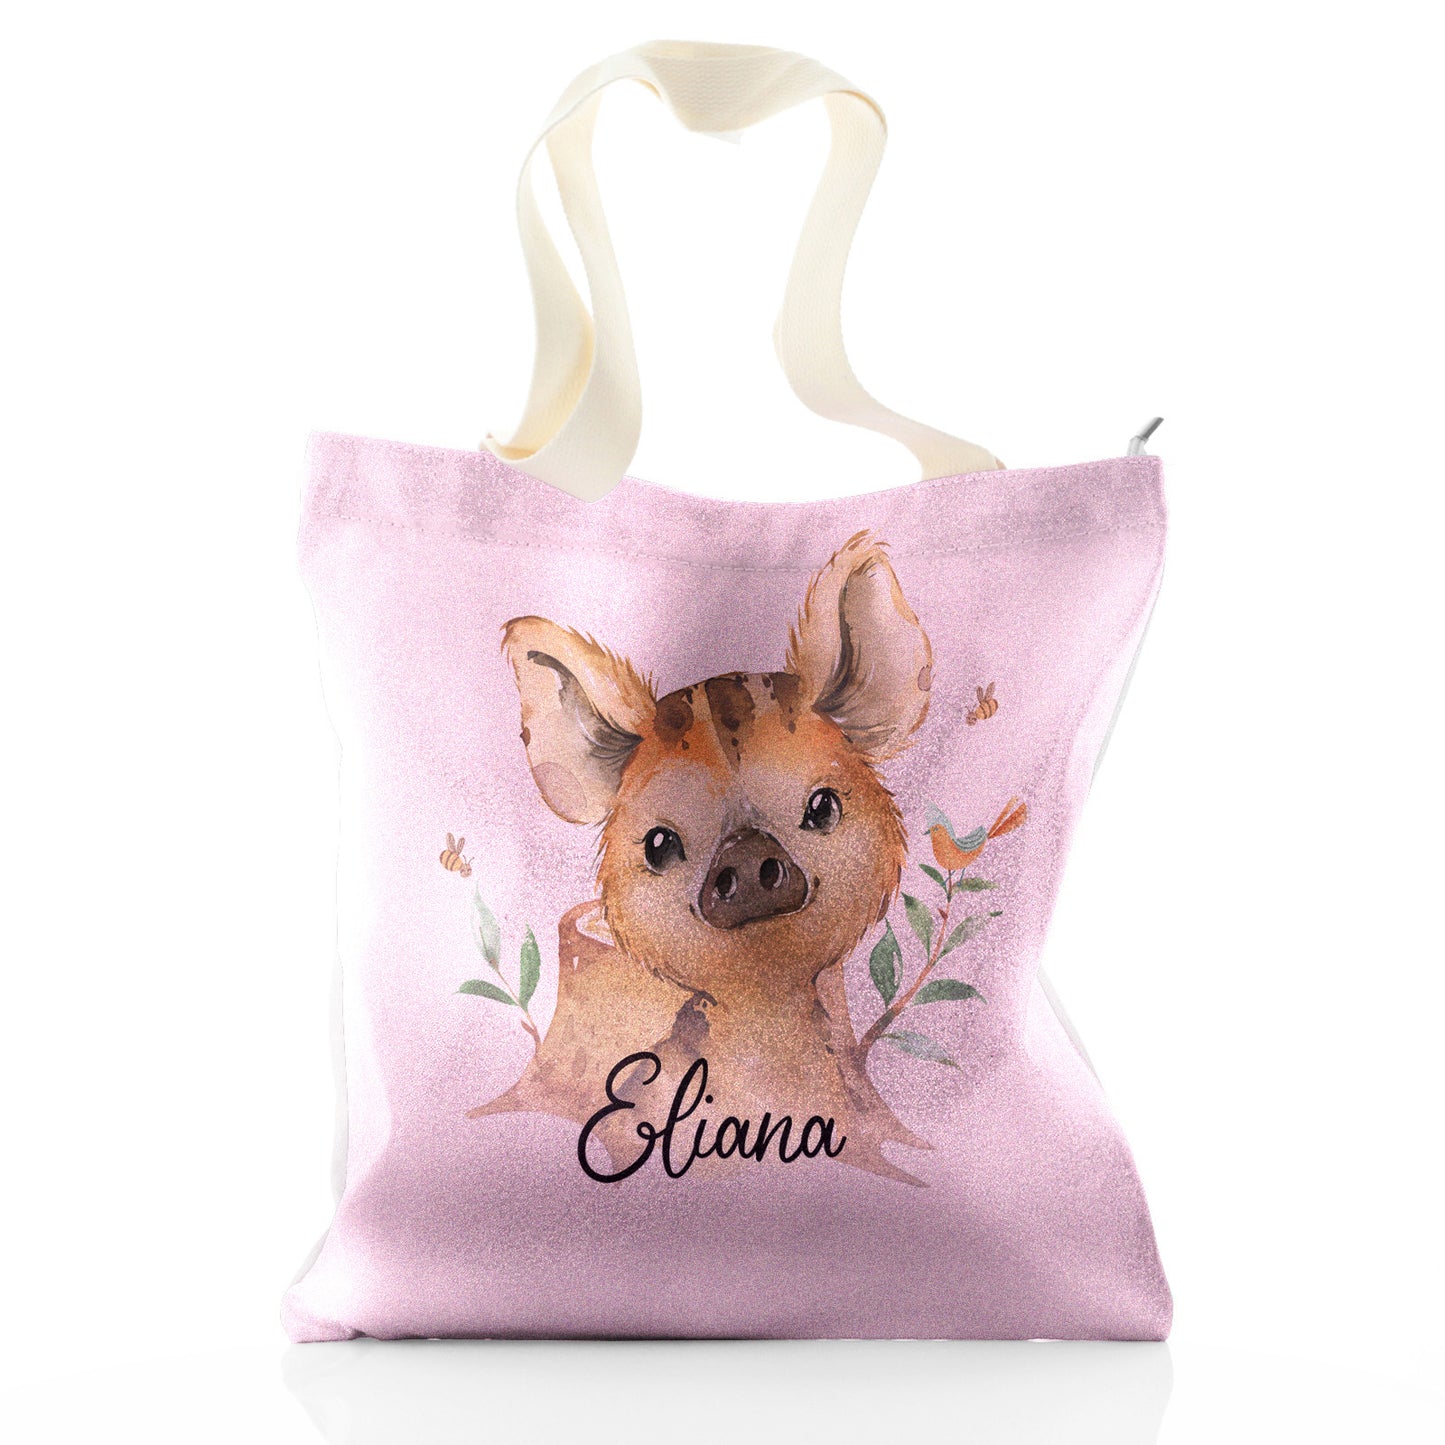 Personalised Glitter Tote Bag with Wild Boar Piglet with Bird and Bees and Cute Text